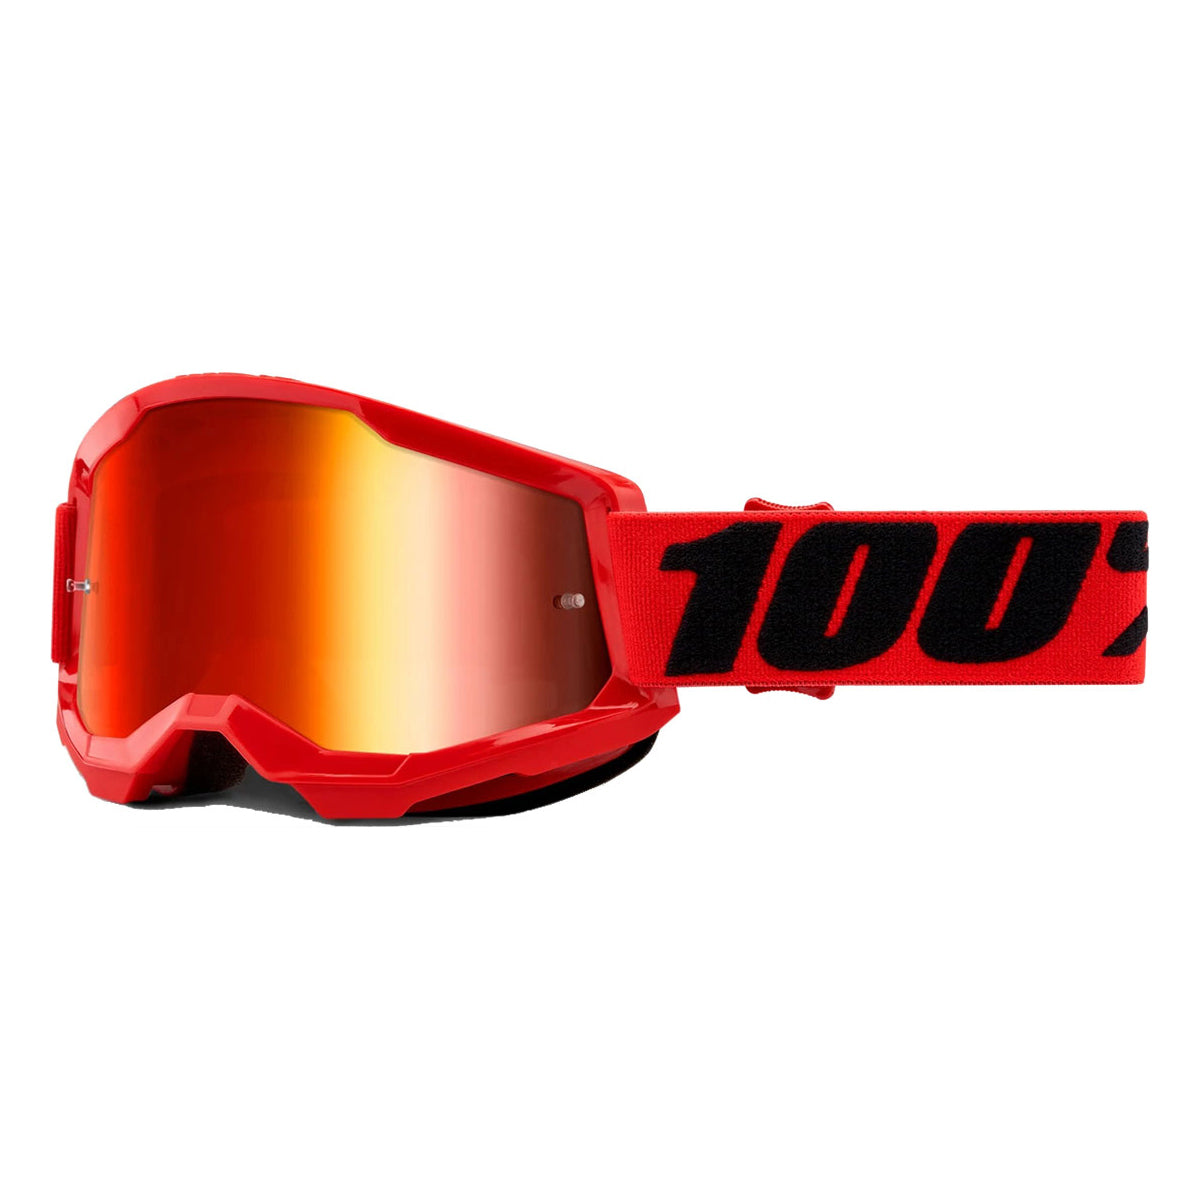 100 Percent Strata 2 Goggles - Red - Red Mirror Lens